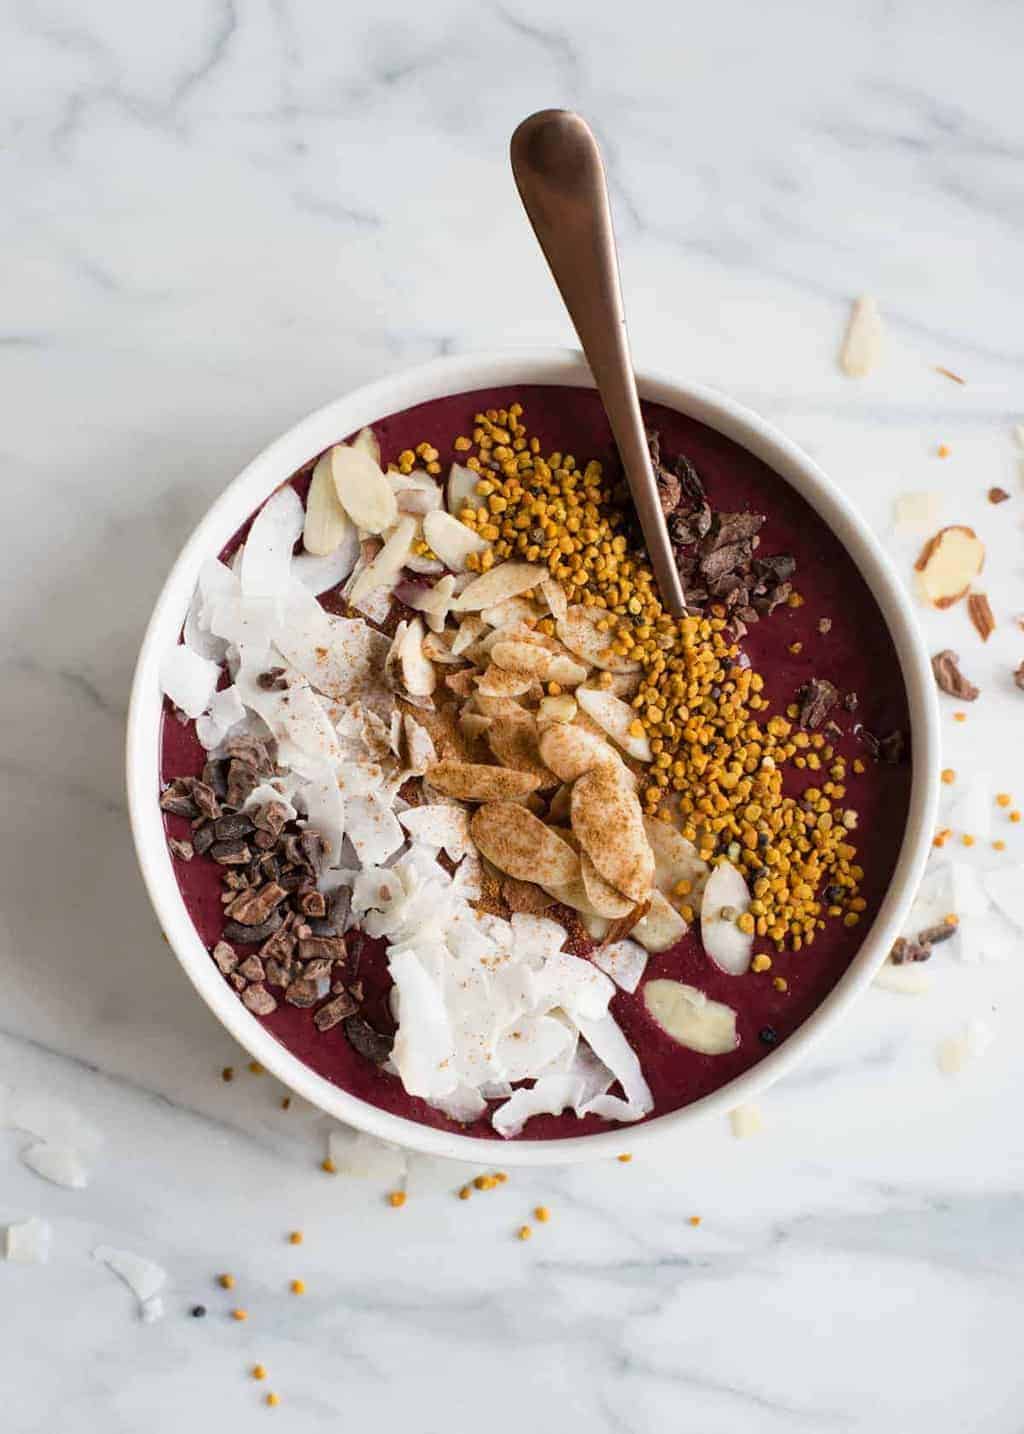 Cherry-Kale Protein Smoothie Bowl (And You Don't Need Protein Powder to Make It!)